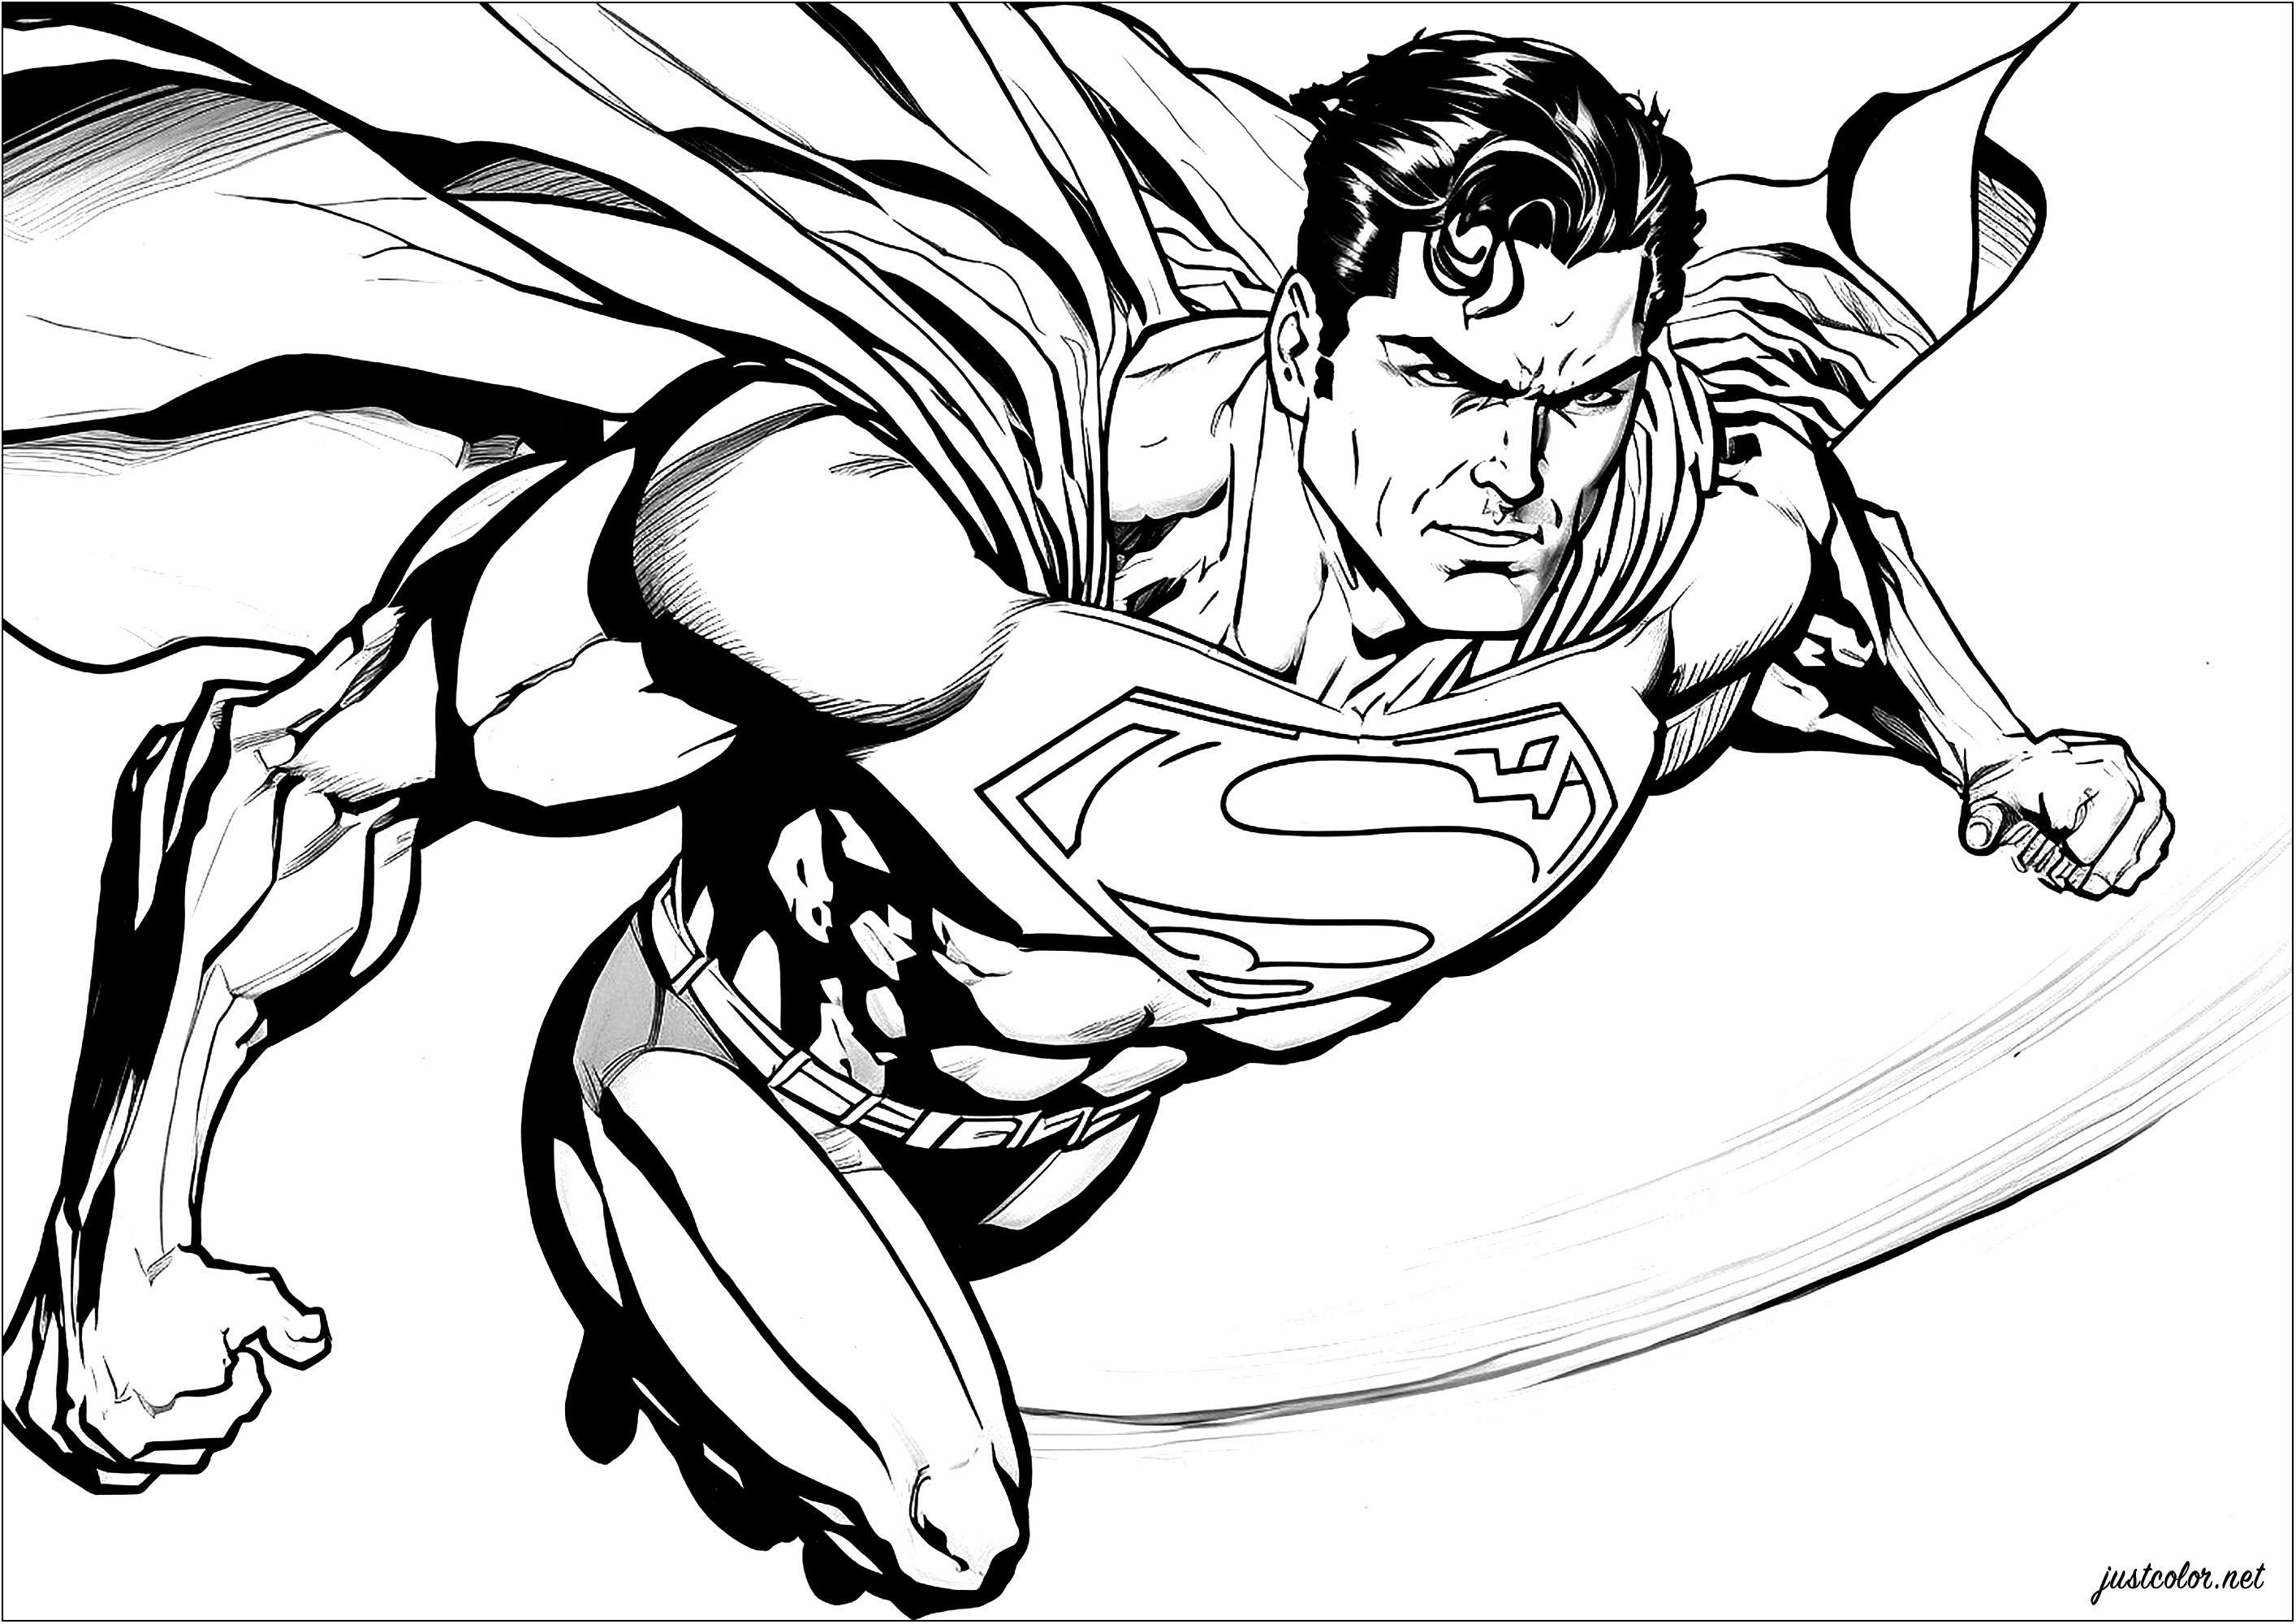 Superman in full flight, cape in the windThis coloring page represents Superman flying. We see the superhero, dressed in his costume (soon to be red and blue thanks to you), flying in the sky, with an expression of determination on his face.